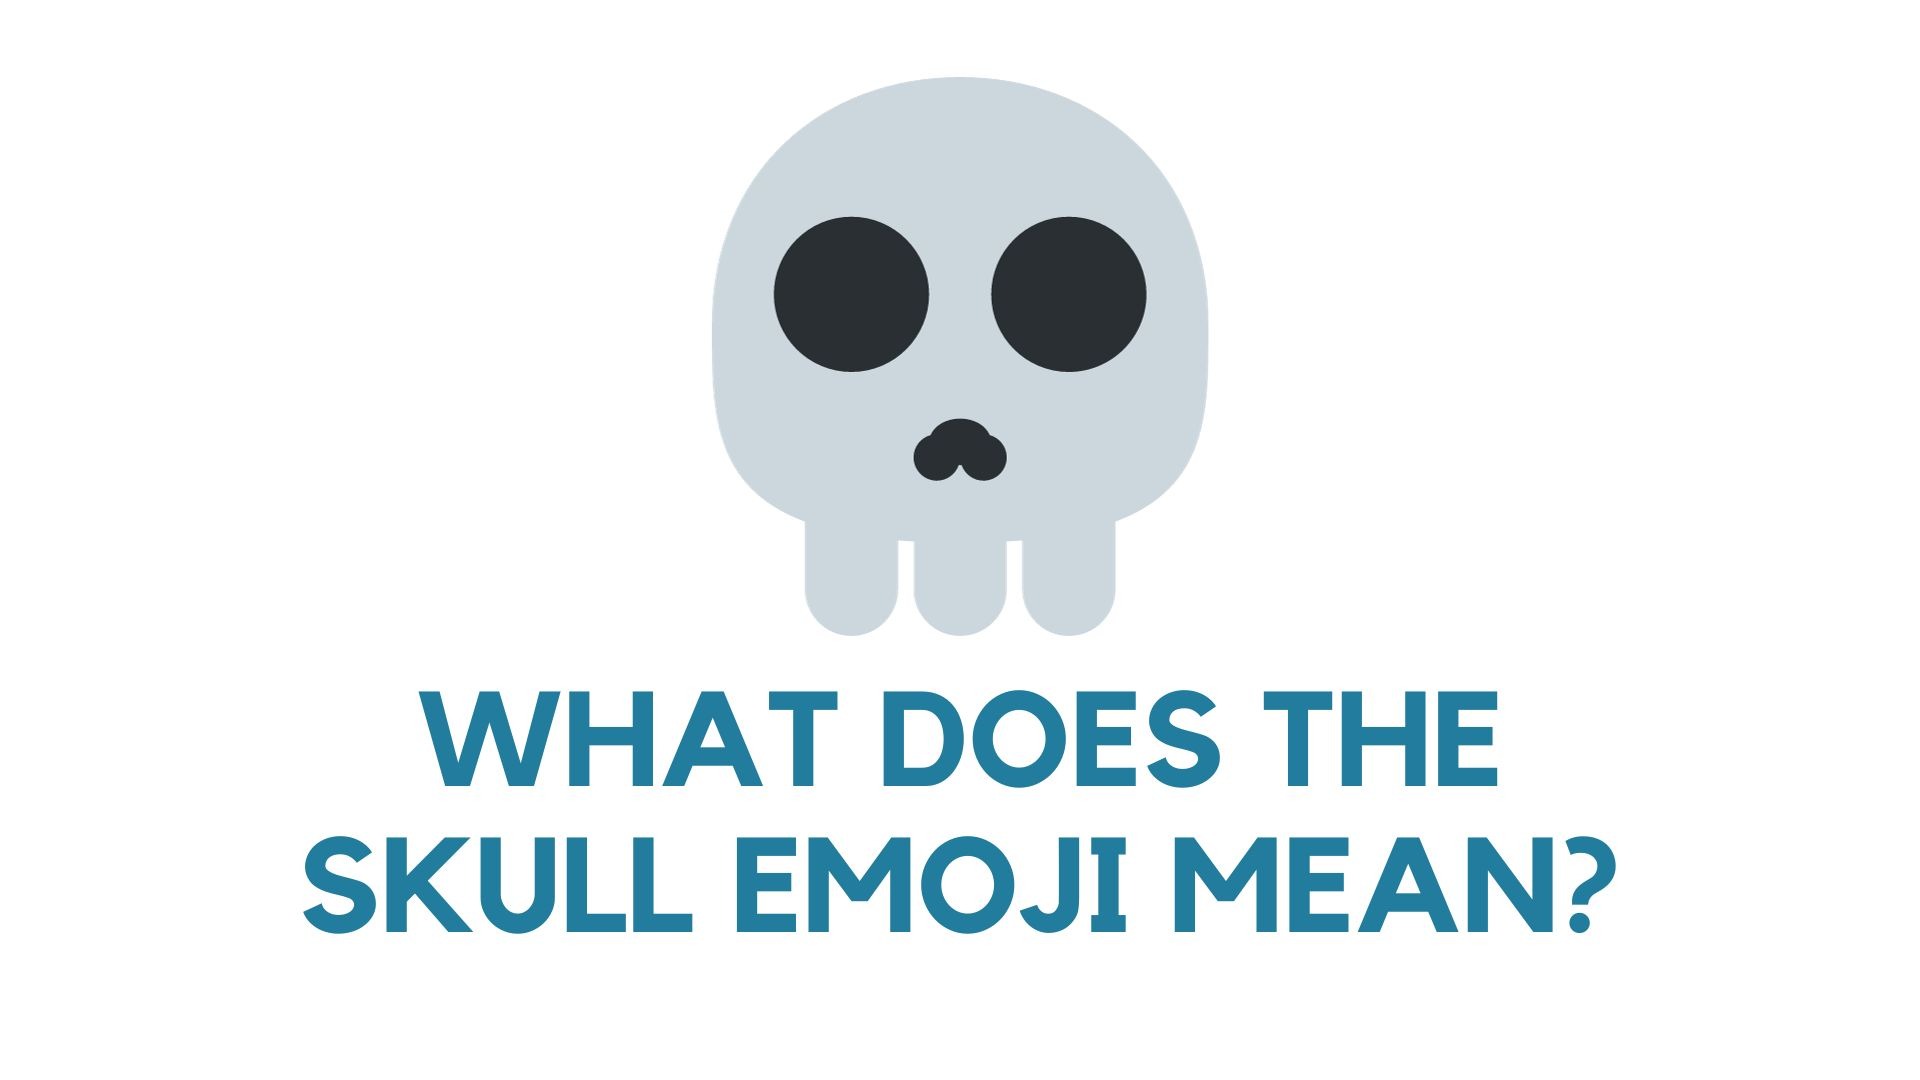 What does the skull emoji mean?